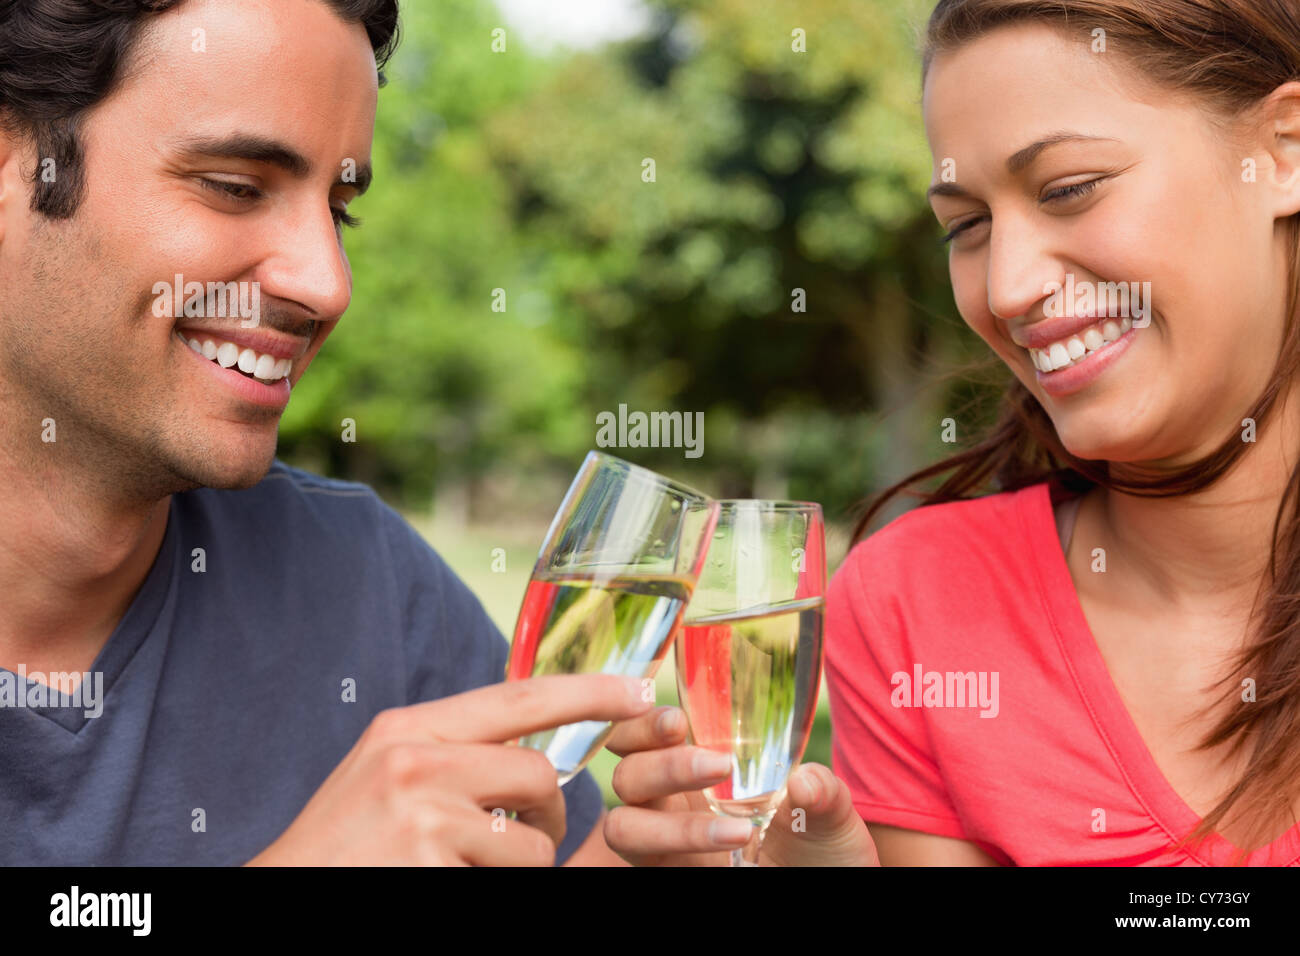 Two friends smiling as they touch glasses of champagne together in celebration Stock Photo